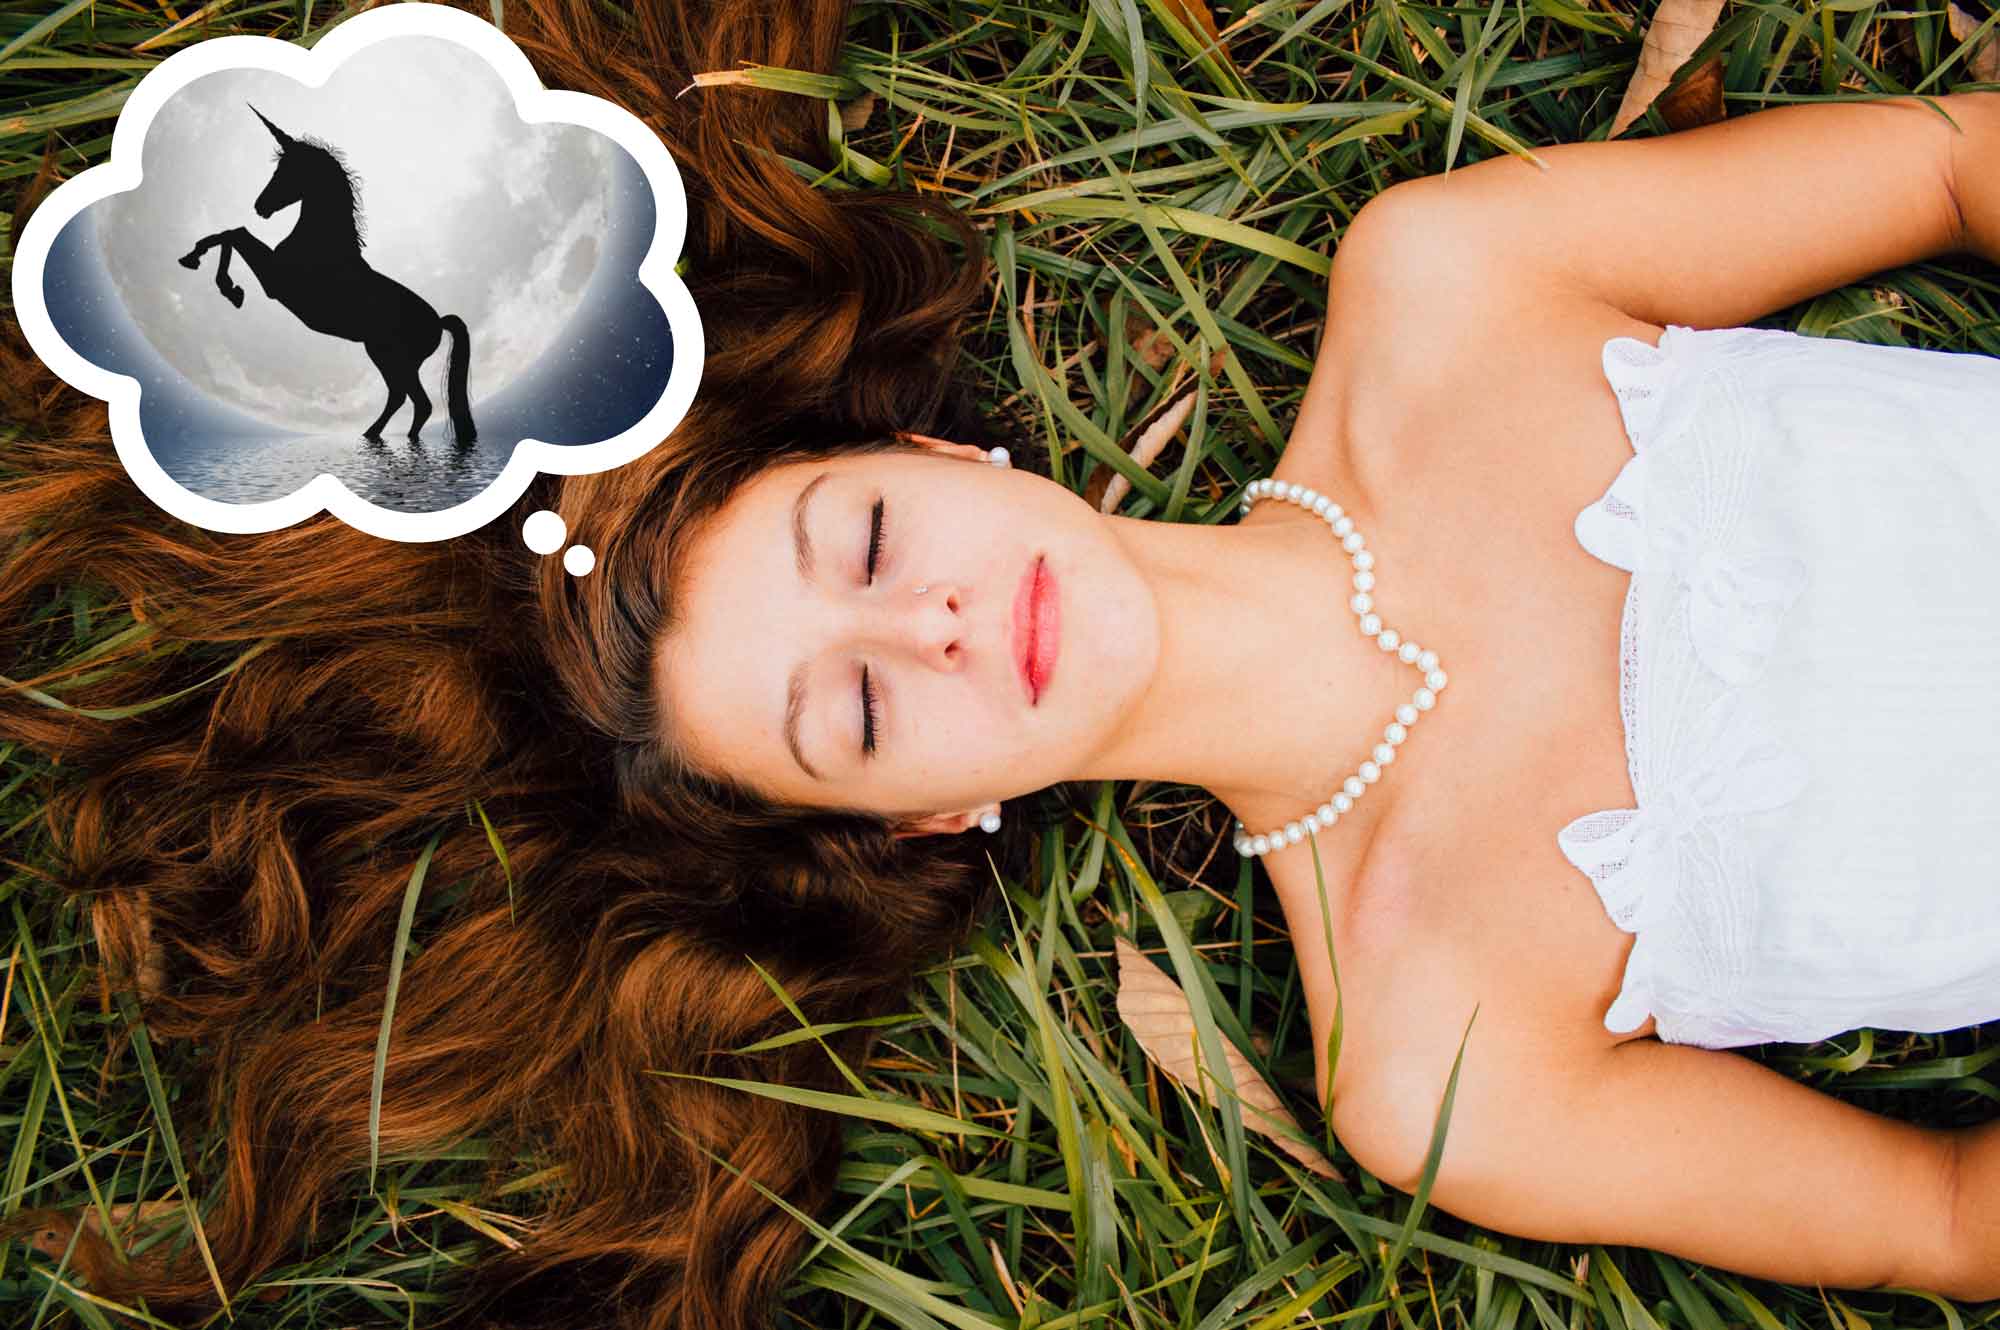 Woman In Rem Sleep Stage Of Her Sleep Cycle Dreaming About A Unicorn